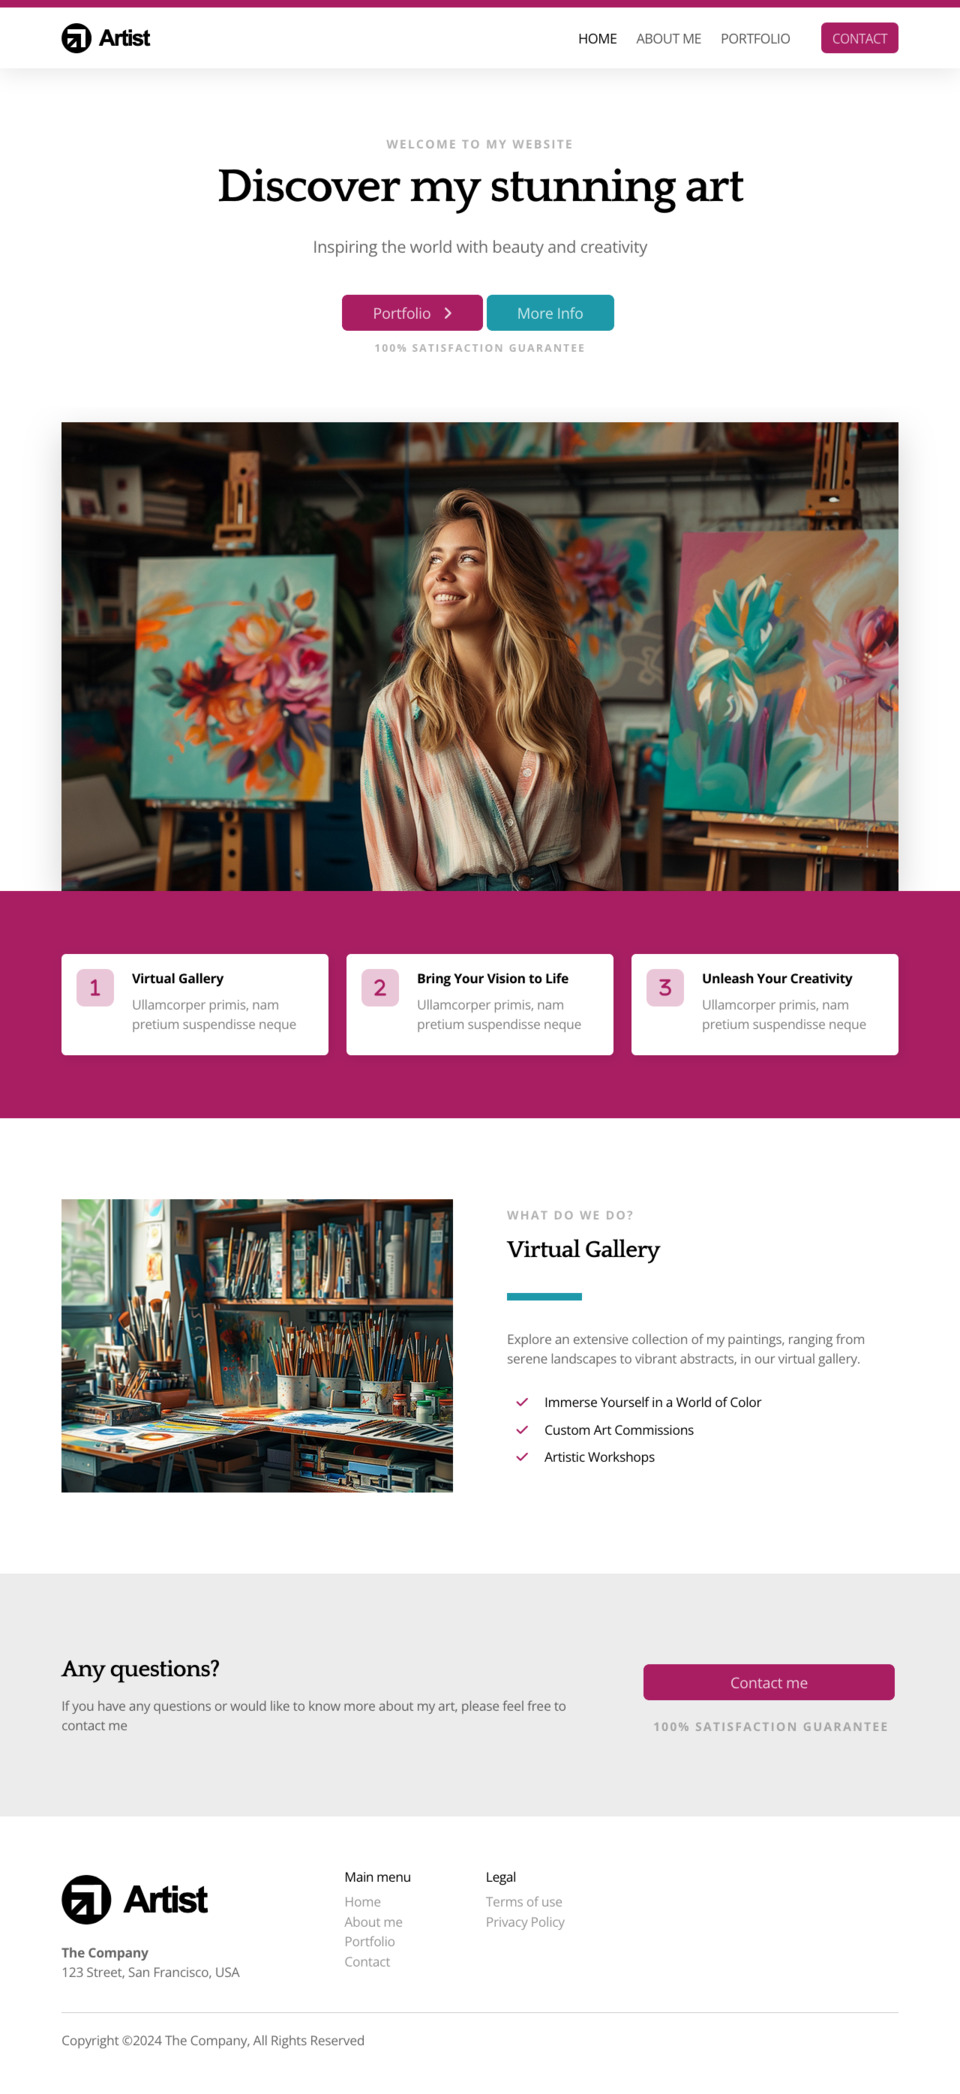 Artist Website Template - Ideal for artists, graphic designers, photographers, art galleries, and anyone looking to create a visually stunning website